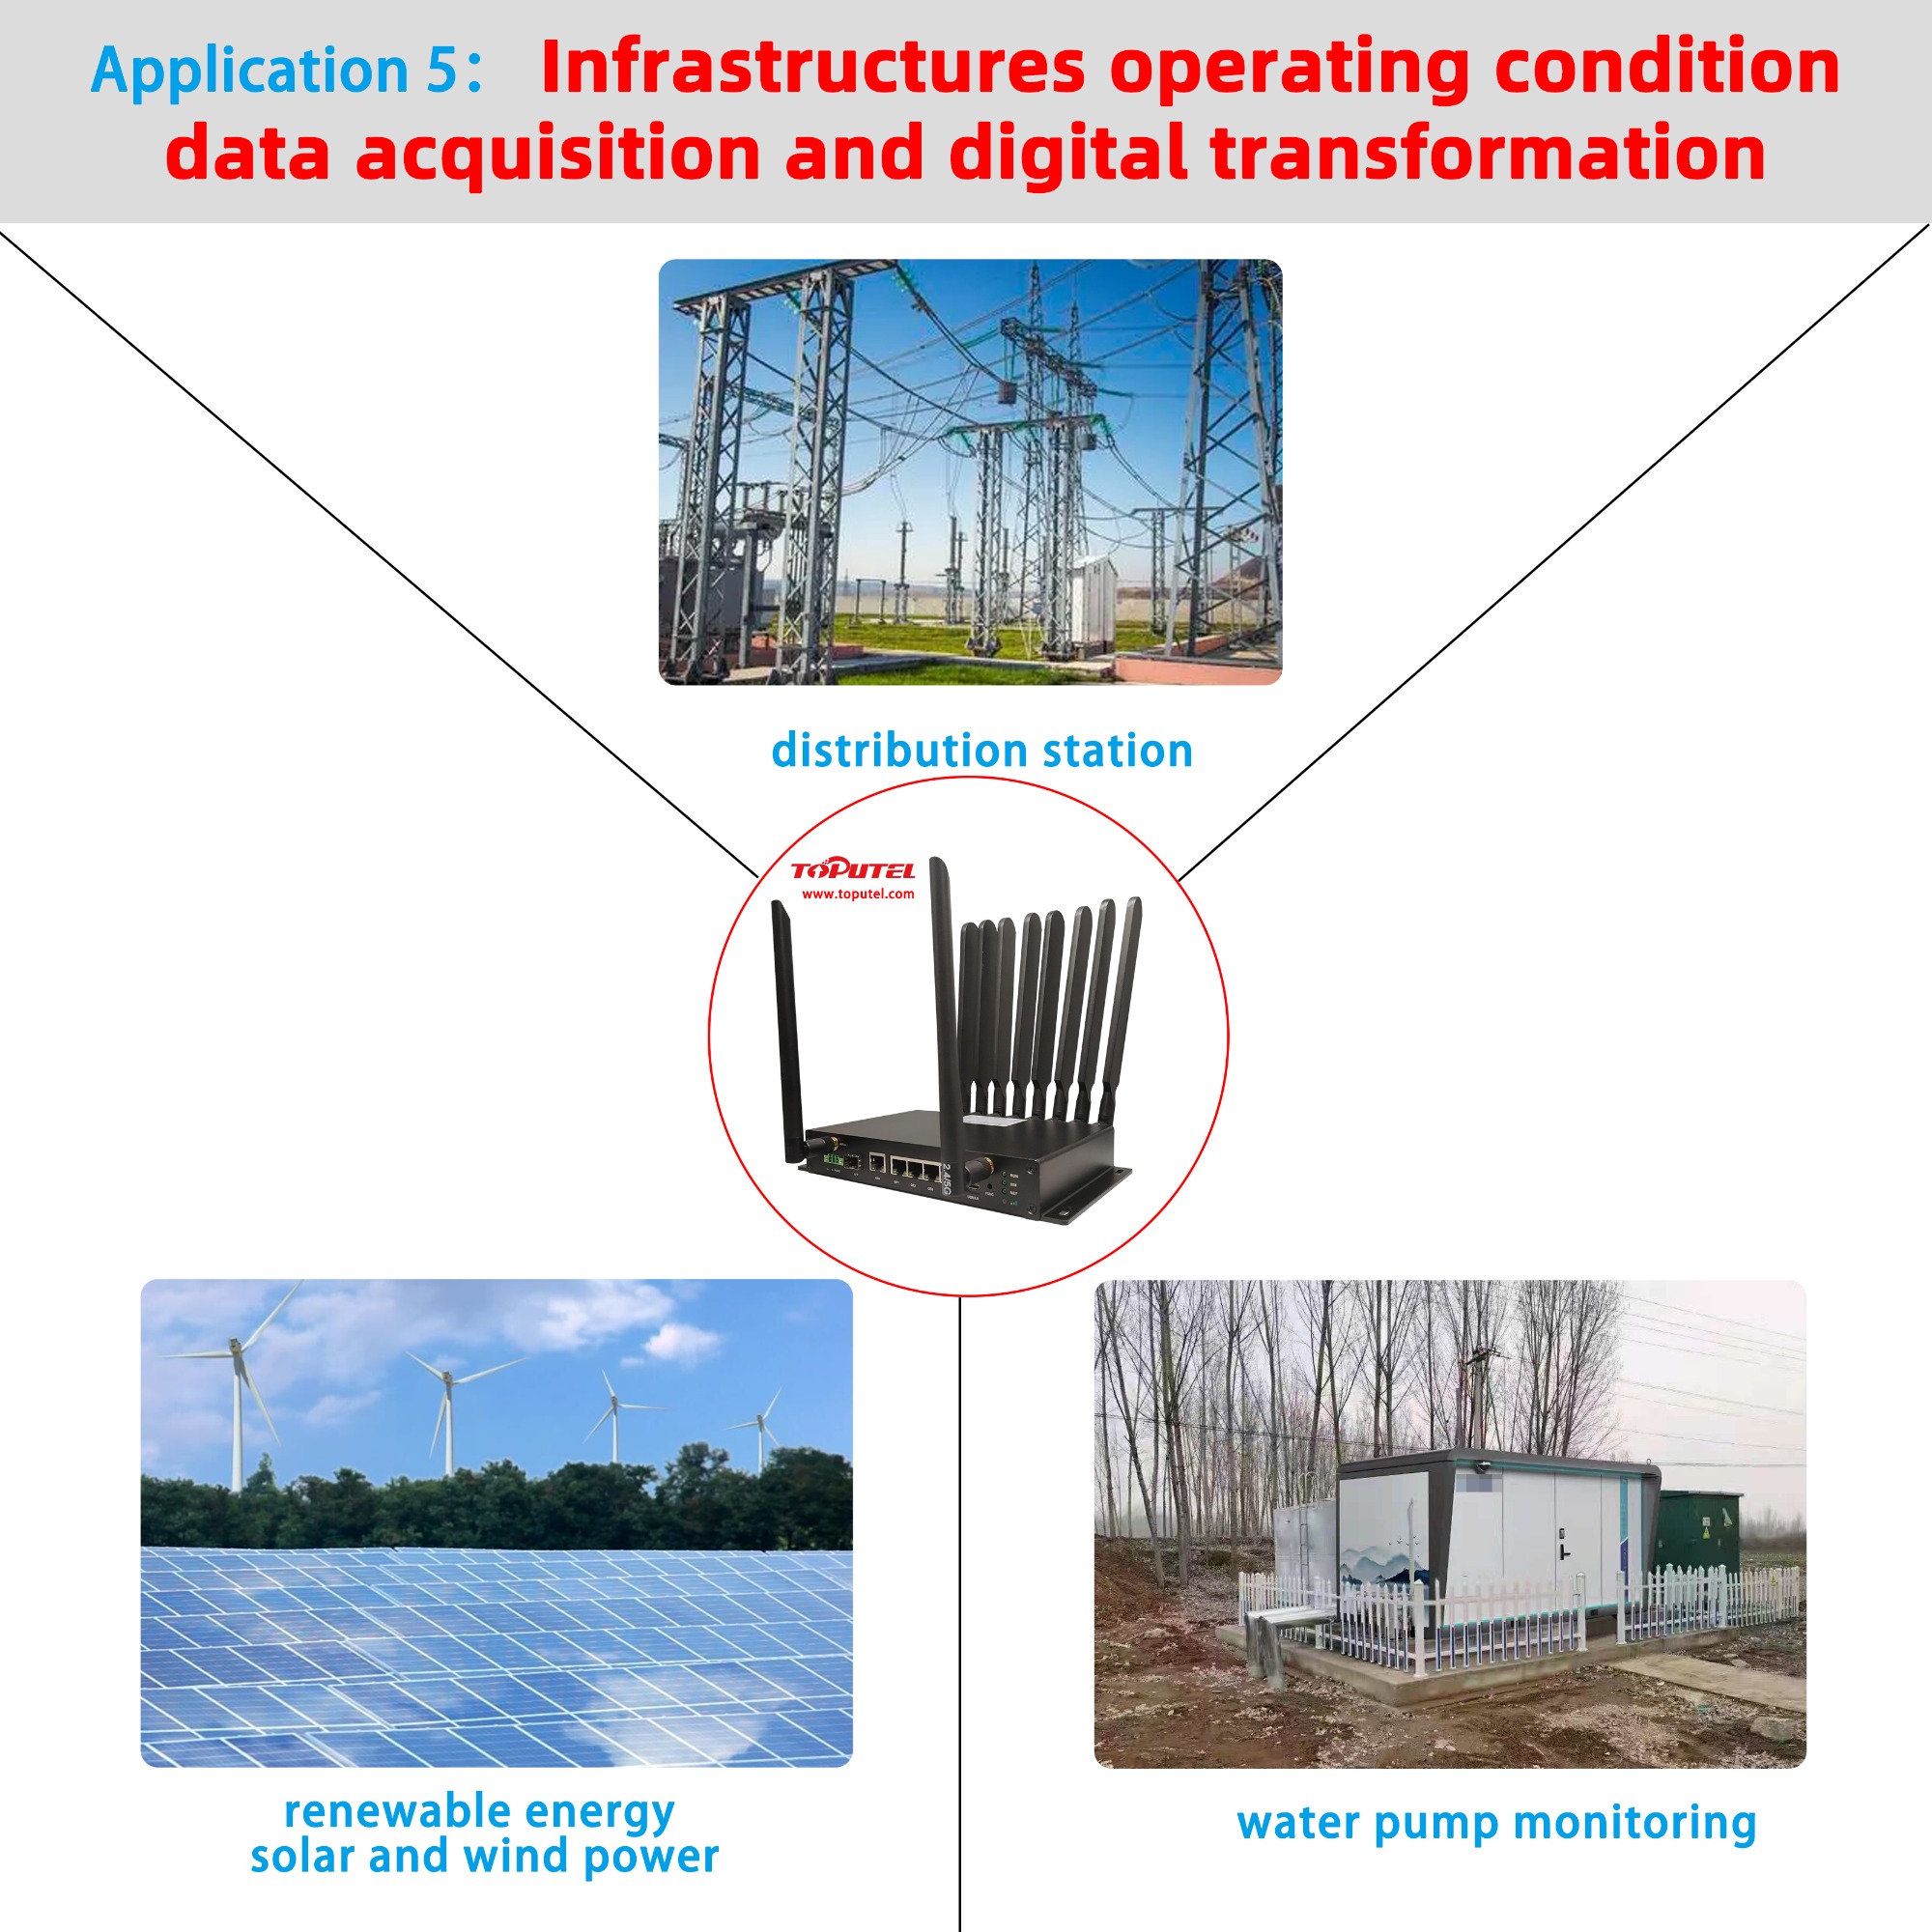 RG5000-H for Infrastructures operating condition data acquisition and digital transformation